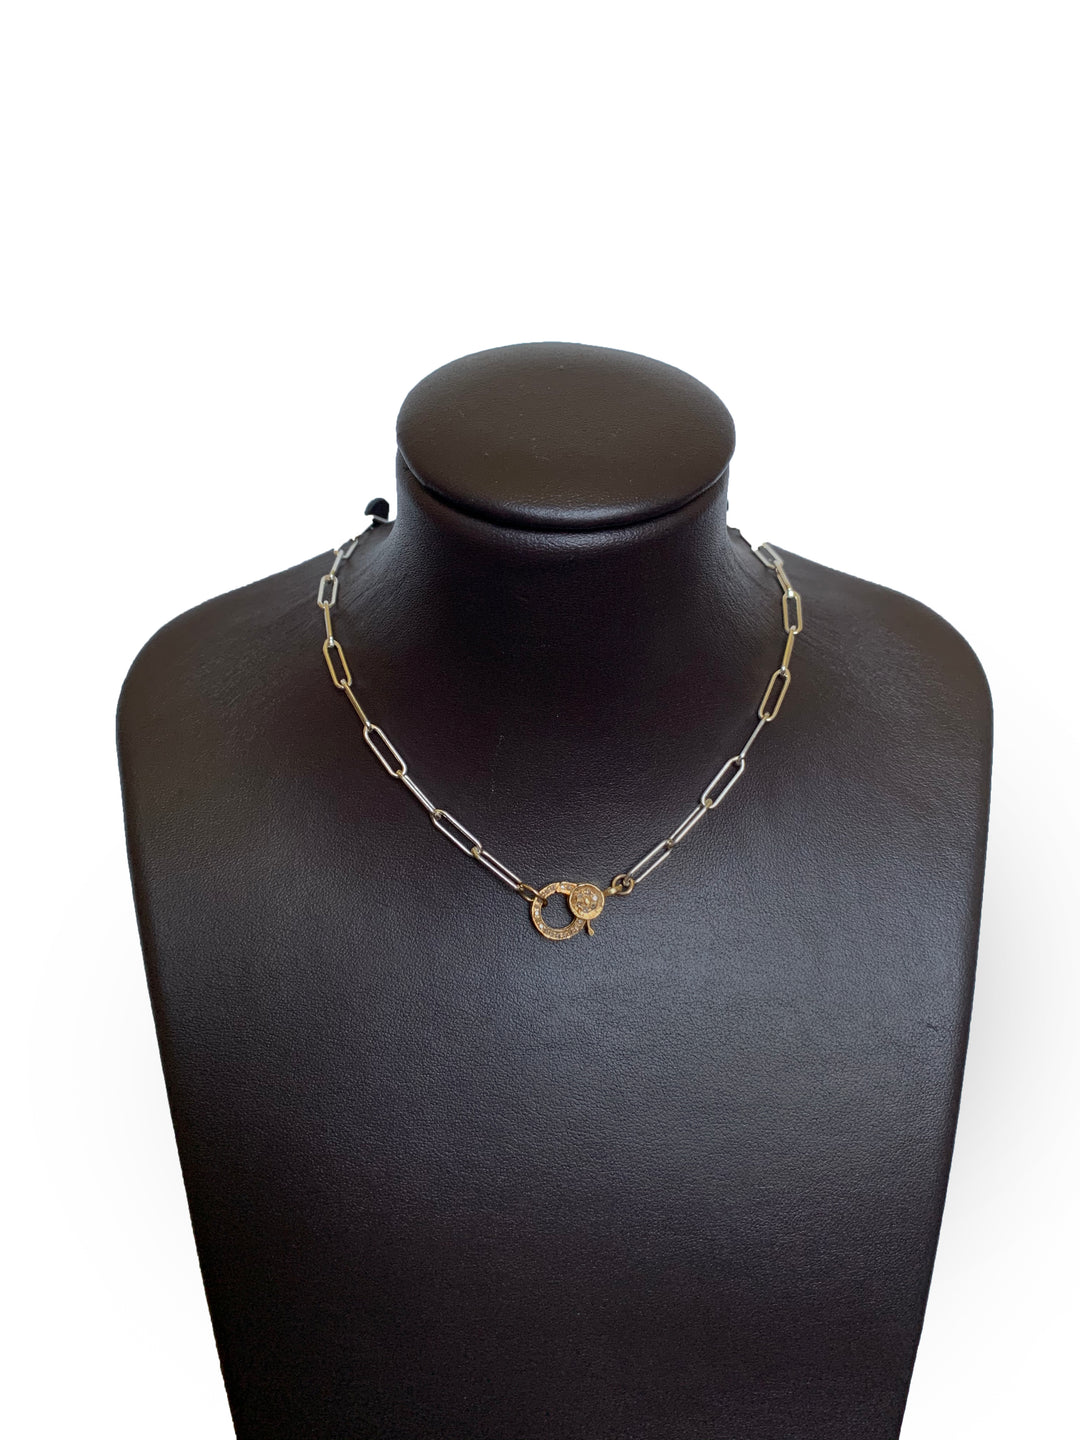 Silver Chain With Gold Clasp - Kingfisher Road - Online Boutique